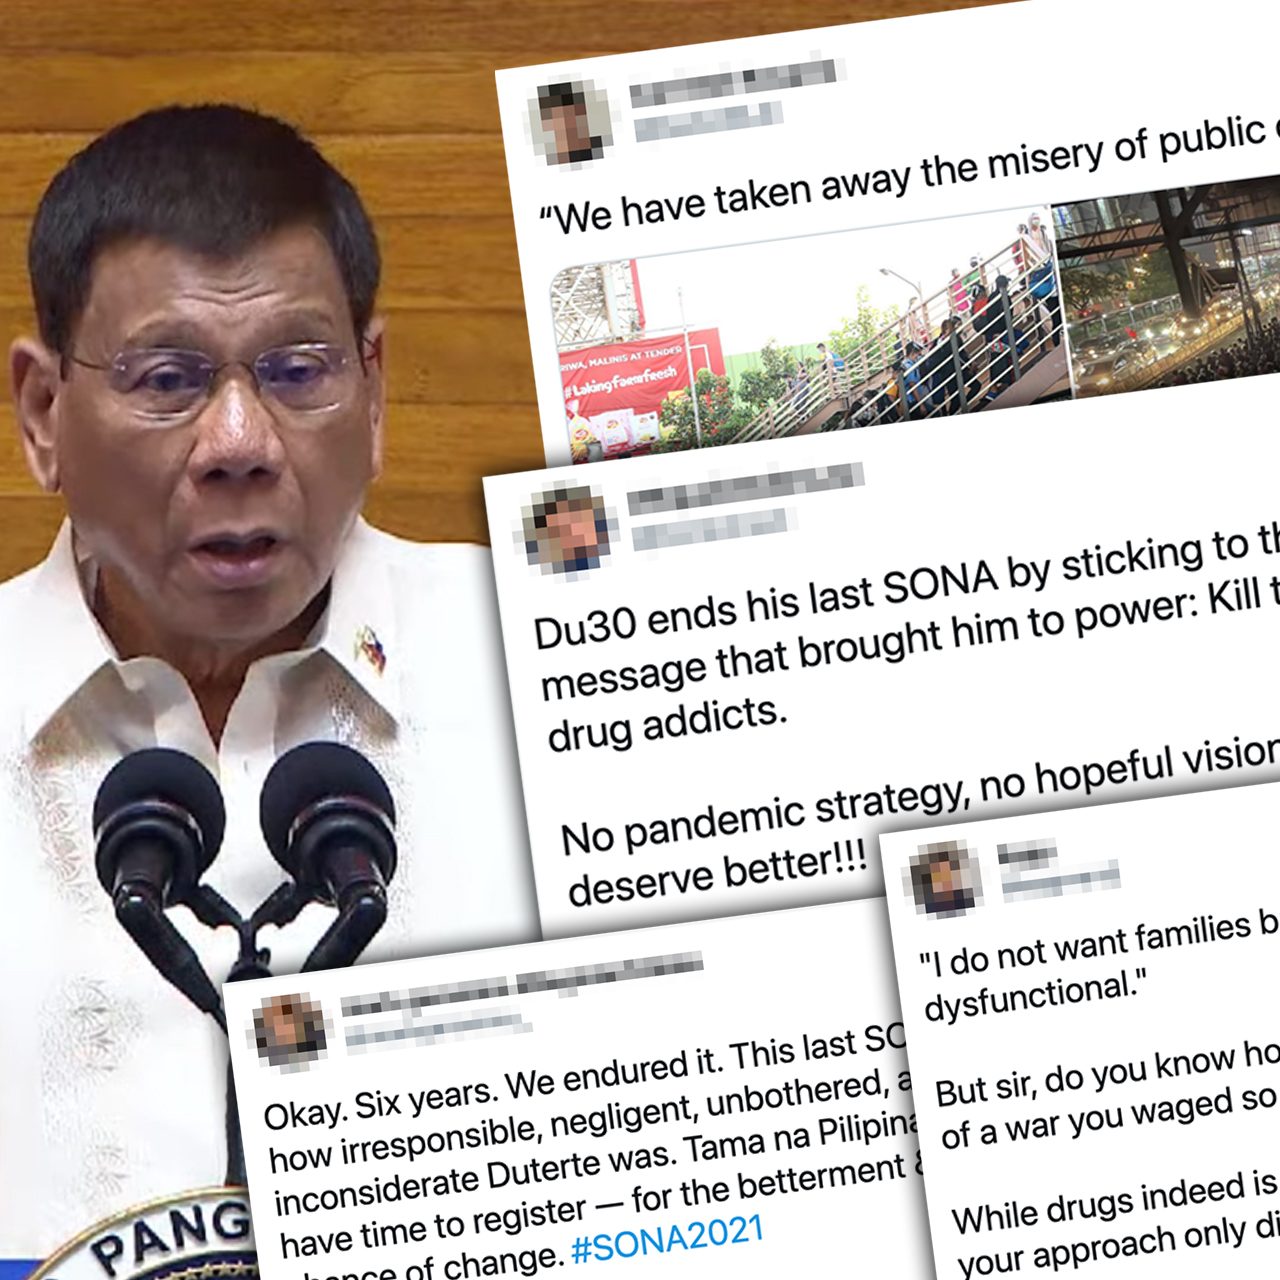 Why were netizens dissatisfied with Duterte’s final SONA?